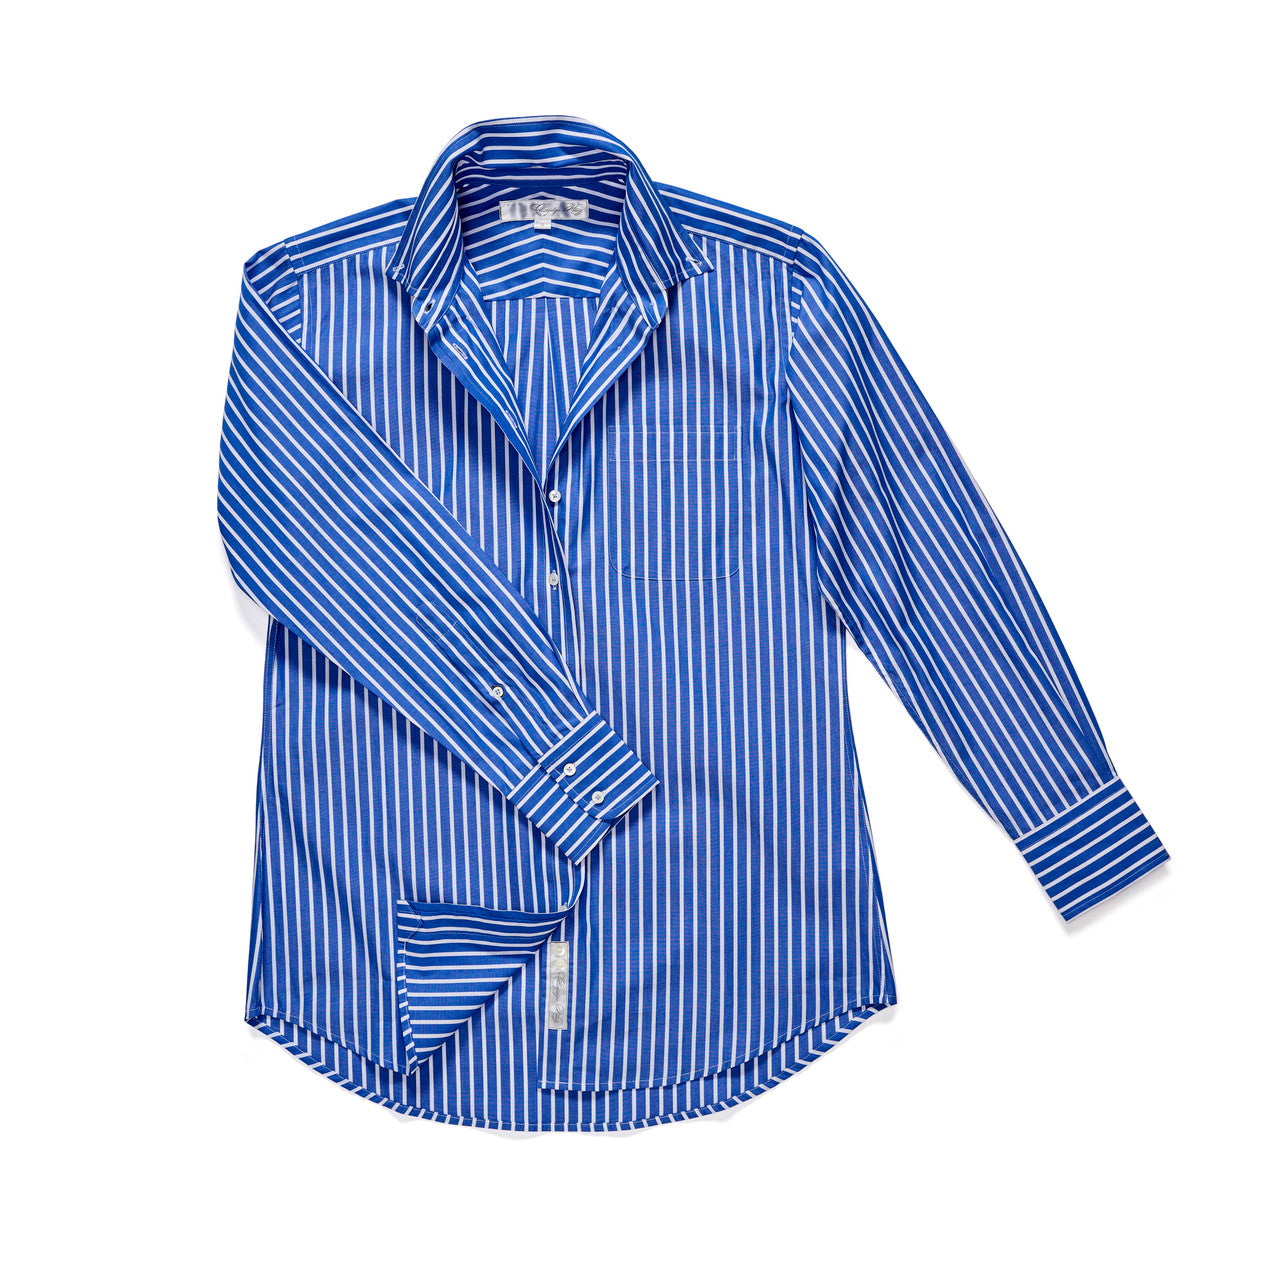 The His and Hers Shirt- Breton Blue Stripe